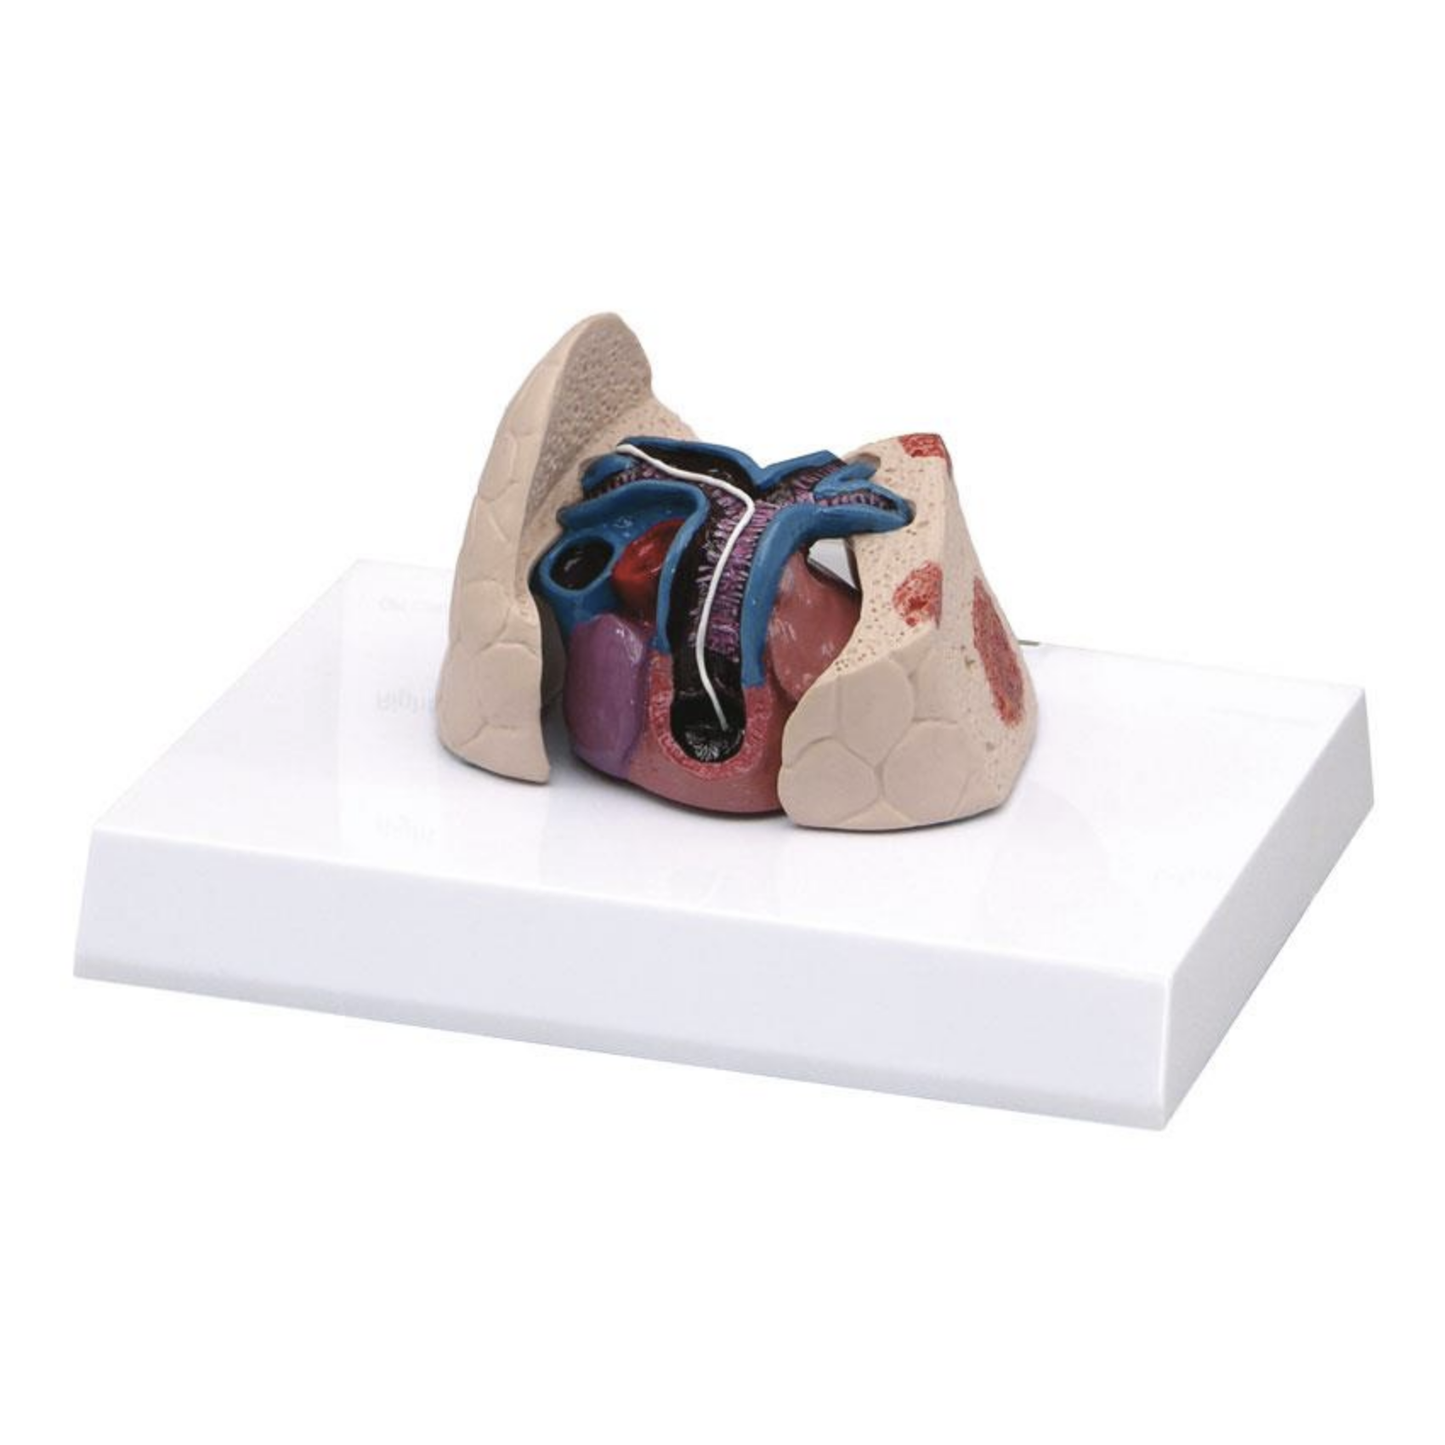 Model of the cat's heart and lungs incl. heartworm and the consequences